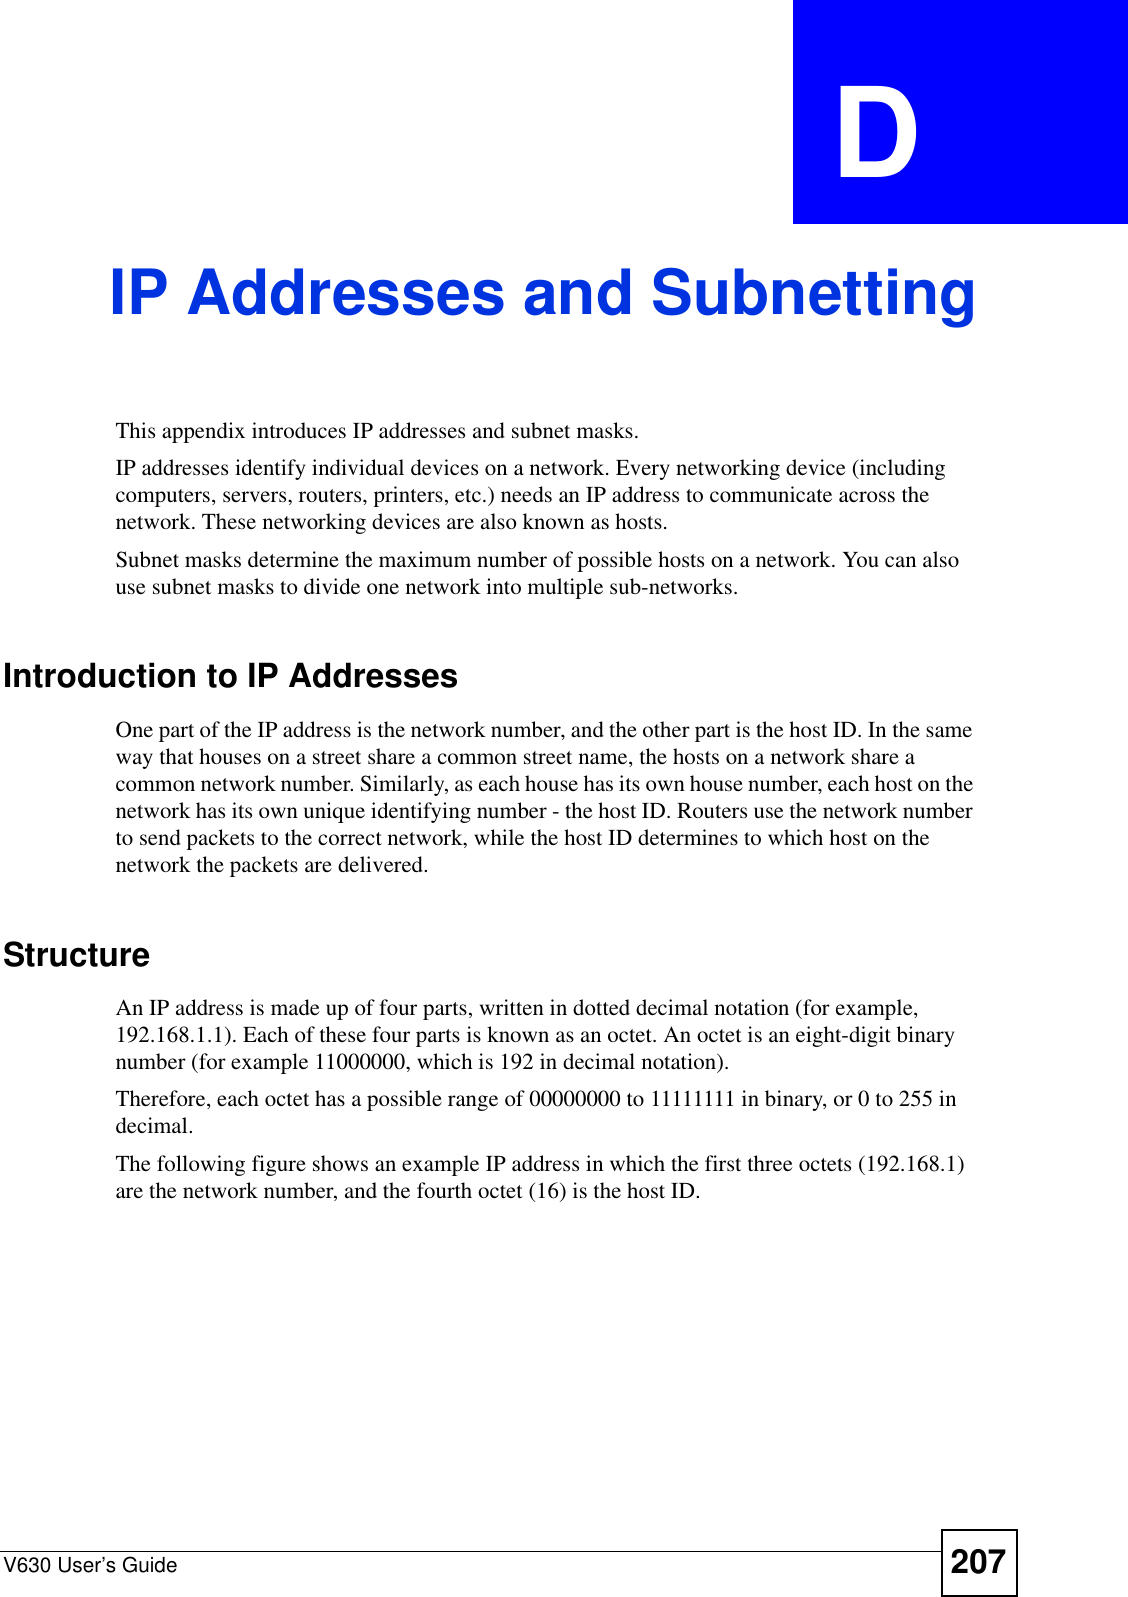 V630 User’s Guide 207APPENDIX  D IP Addresses and SubnettingThis appendix introduces IP addresses and subnet masks. IP addresses identify individual devices on a network. Every networking device (including computers, servers, routers, printers, etc.) needs an IP address to communicate across the network. These networking devices are also known as hosts.Subnet masks determine the maximum number of possible hosts on a network. You can also use subnet masks to divide one network into multiple sub-networks.Introduction to IP AddressesOne part of the IP address is the network number, and the other part is the host ID. In the same way that houses on a street share a common street name, the hosts on a network share a common network number. Similarly, as each house has its own house number, each host on the network has its own unique identifying number - the host ID. Routers use the network number to send packets to the correct network, while the host ID determines to which host on the network the packets are delivered.StructureAn IP address is made up of four parts, written in dotted decimal notation (for example, 192.168.1.1). Each of these four parts is known as an octet. An octet is an eight-digit binary number (for example 11000000, which is 192 in decimal notation). Therefore, each octet has a possible range of 00000000 to 11111111 in binary, or 0 to 255 in decimal.The following figure shows an example IP address in which the first three octets (192.168.1) are the network number, and the fourth octet (16) is the host ID.